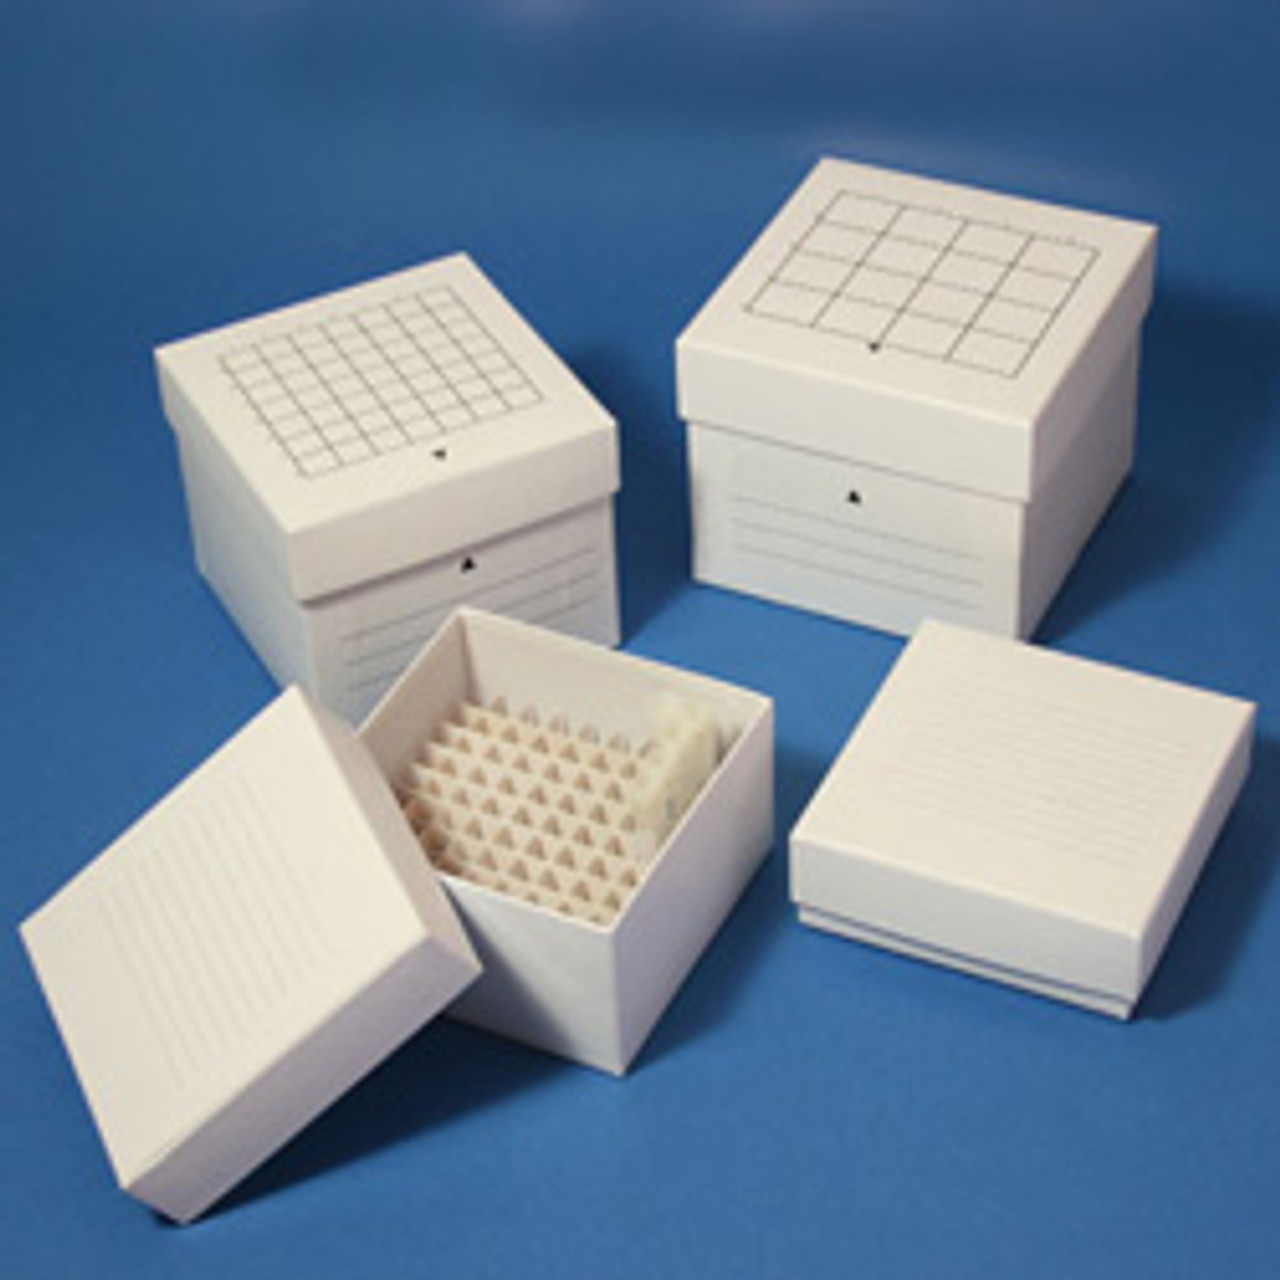 Stellar Scientific Carboard Cryo Freezer Boxes for 15mL Tubes with Dividers  - Lab Supplies - Stellar Scientific